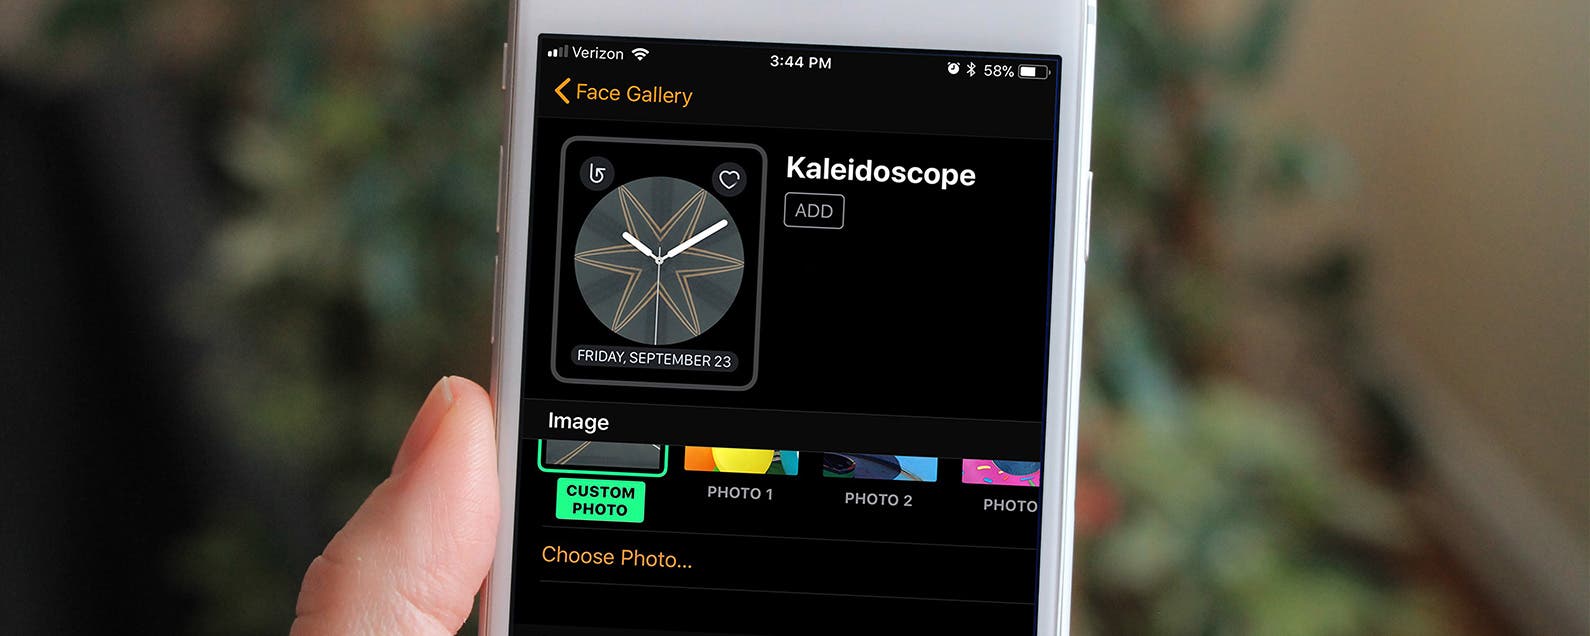 download the last version for apple Kaleidoscope